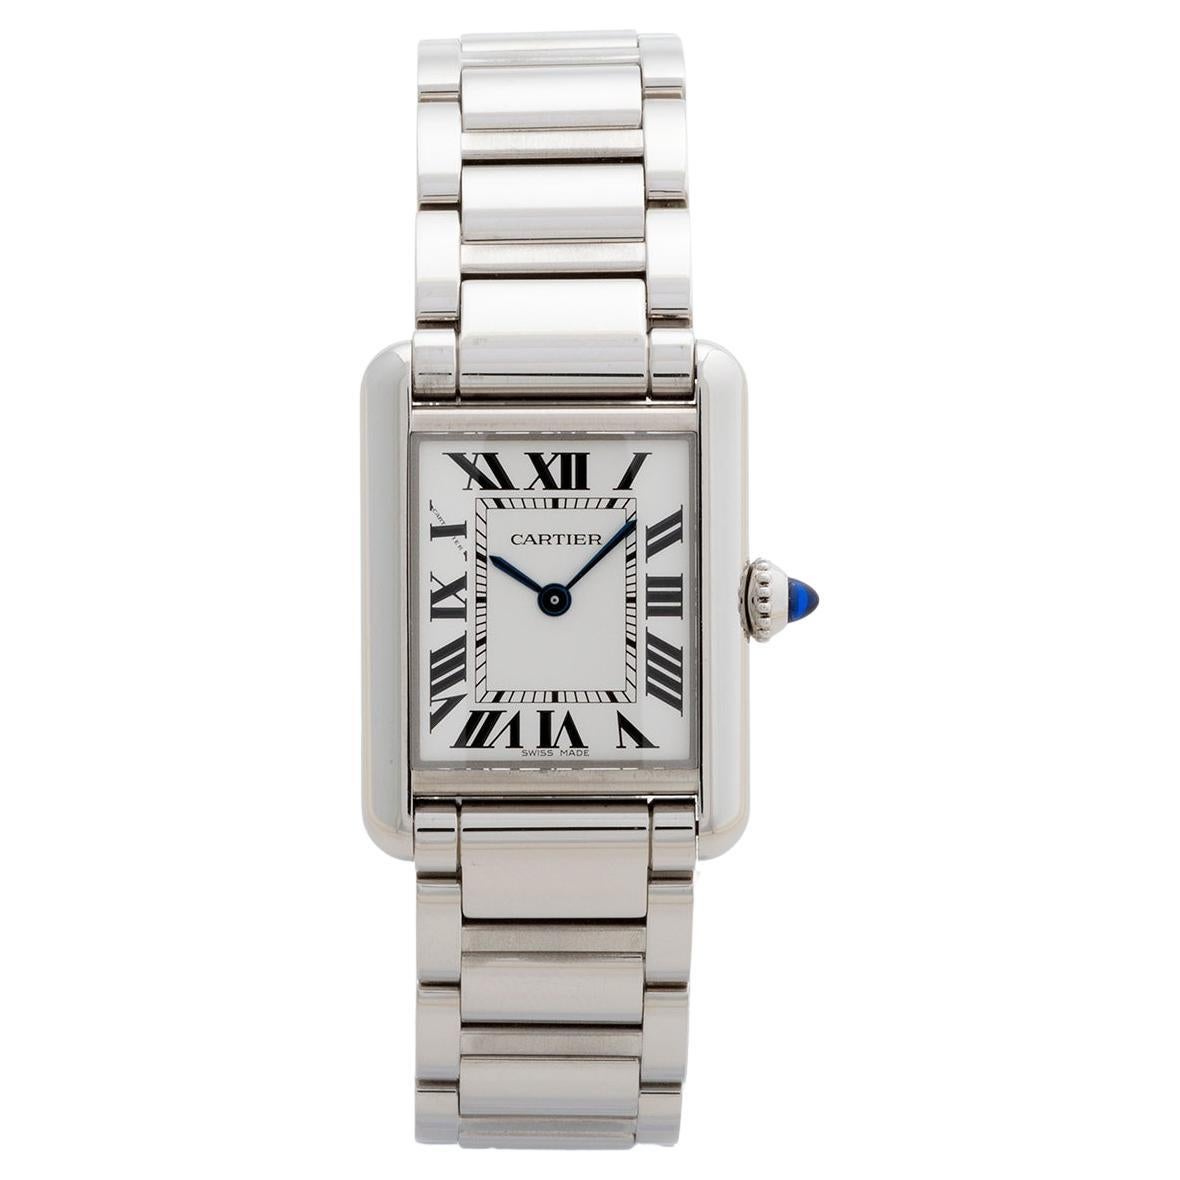 Our ladies Cartier Tank Solo 4322 WSTA0051 features a 22 x 29mm stainless steel case with stainless steel bracelet. This example is presented in outstanding condition without significant signs of use, and comes complete with inner and outer box,